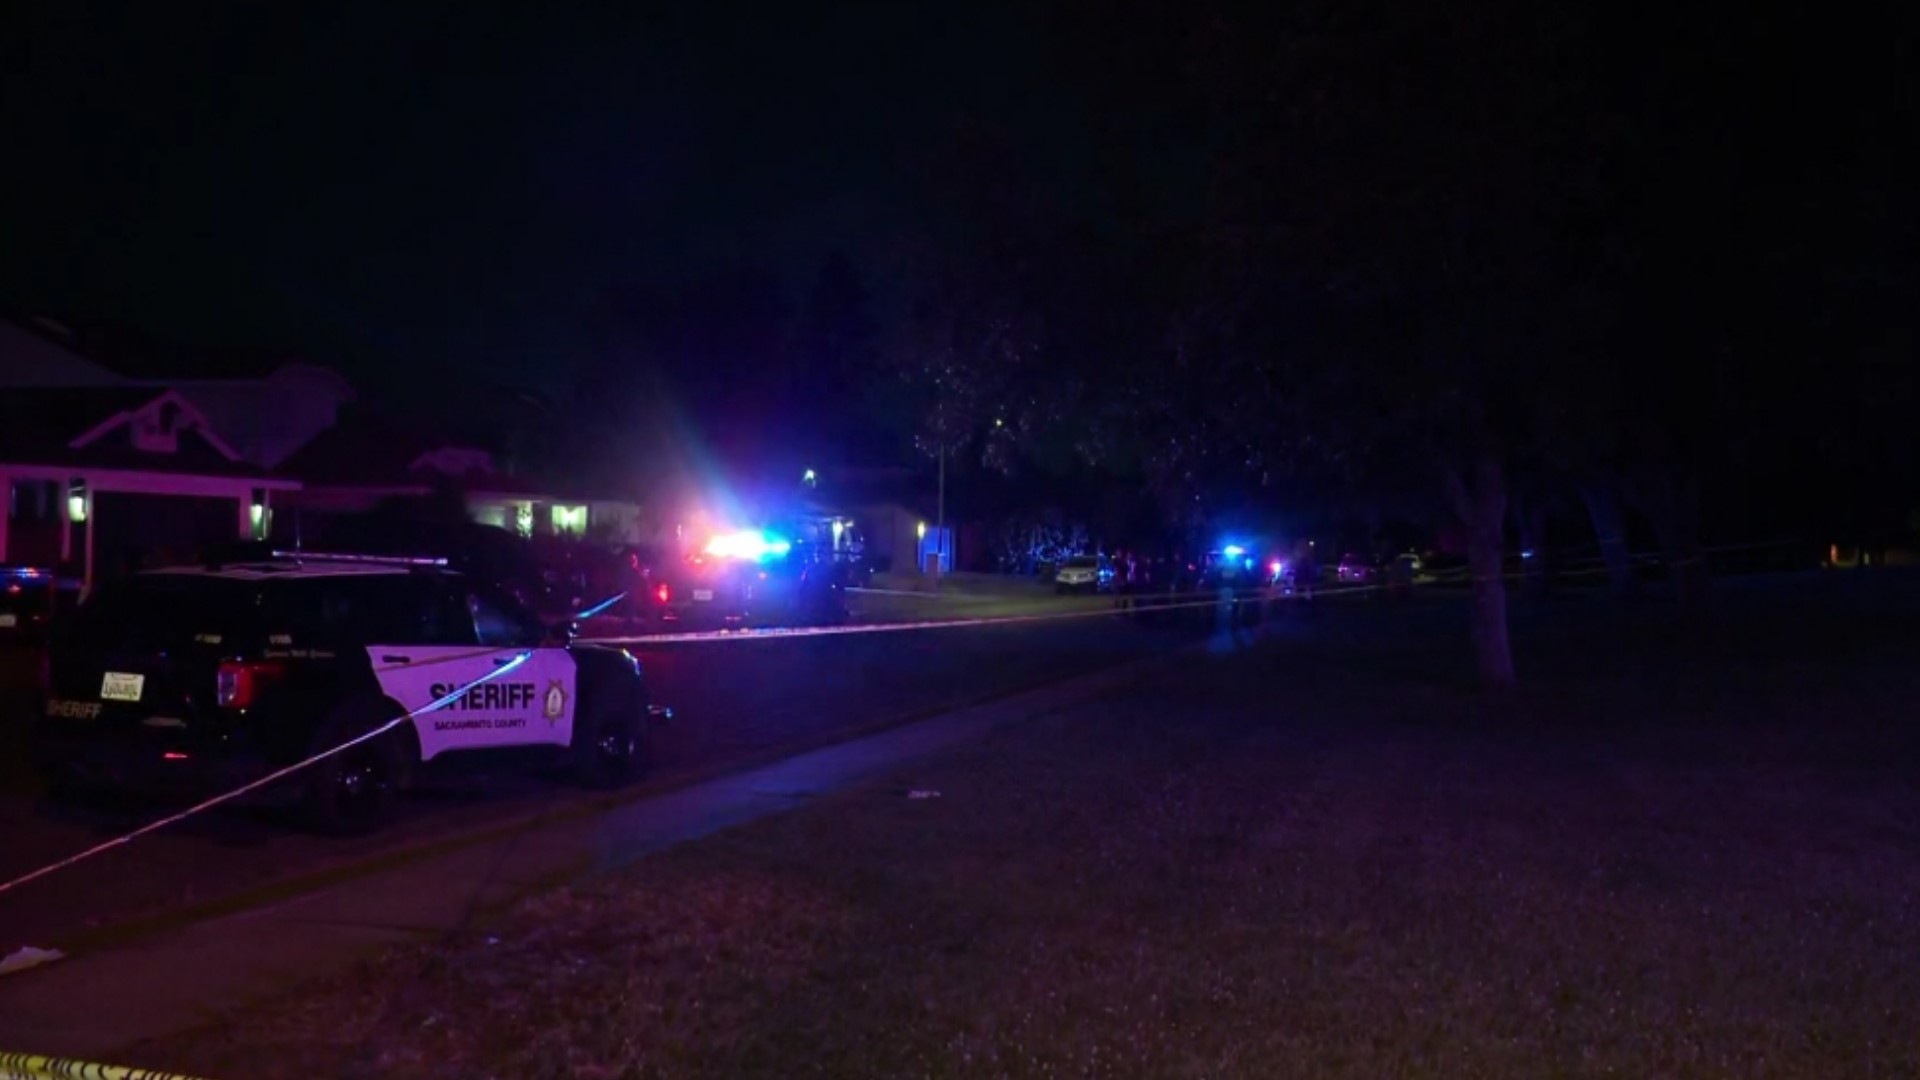 The shooting happened at Vintage park on Vintage Park Drive and Helmsdale Drive around 6 p.m.